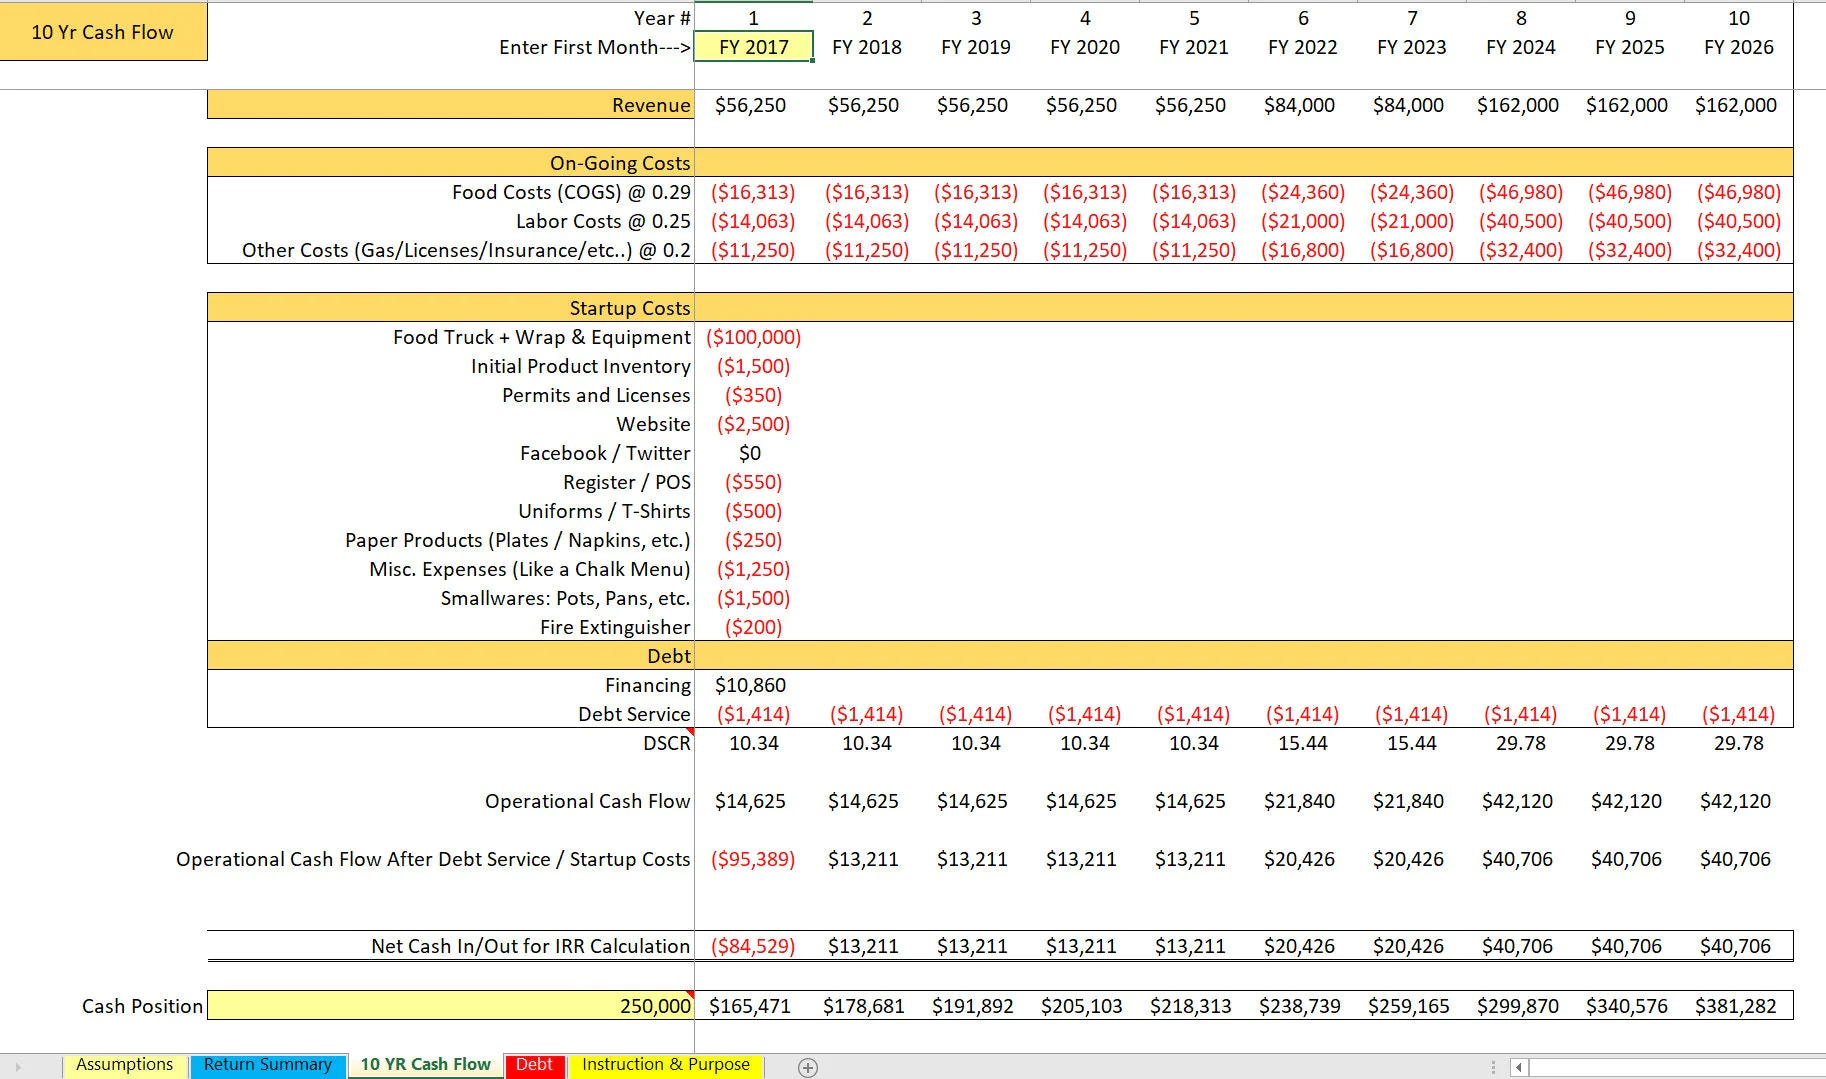 Food Truck Financial Model (Excel workbook (XLSX)) Preview Image